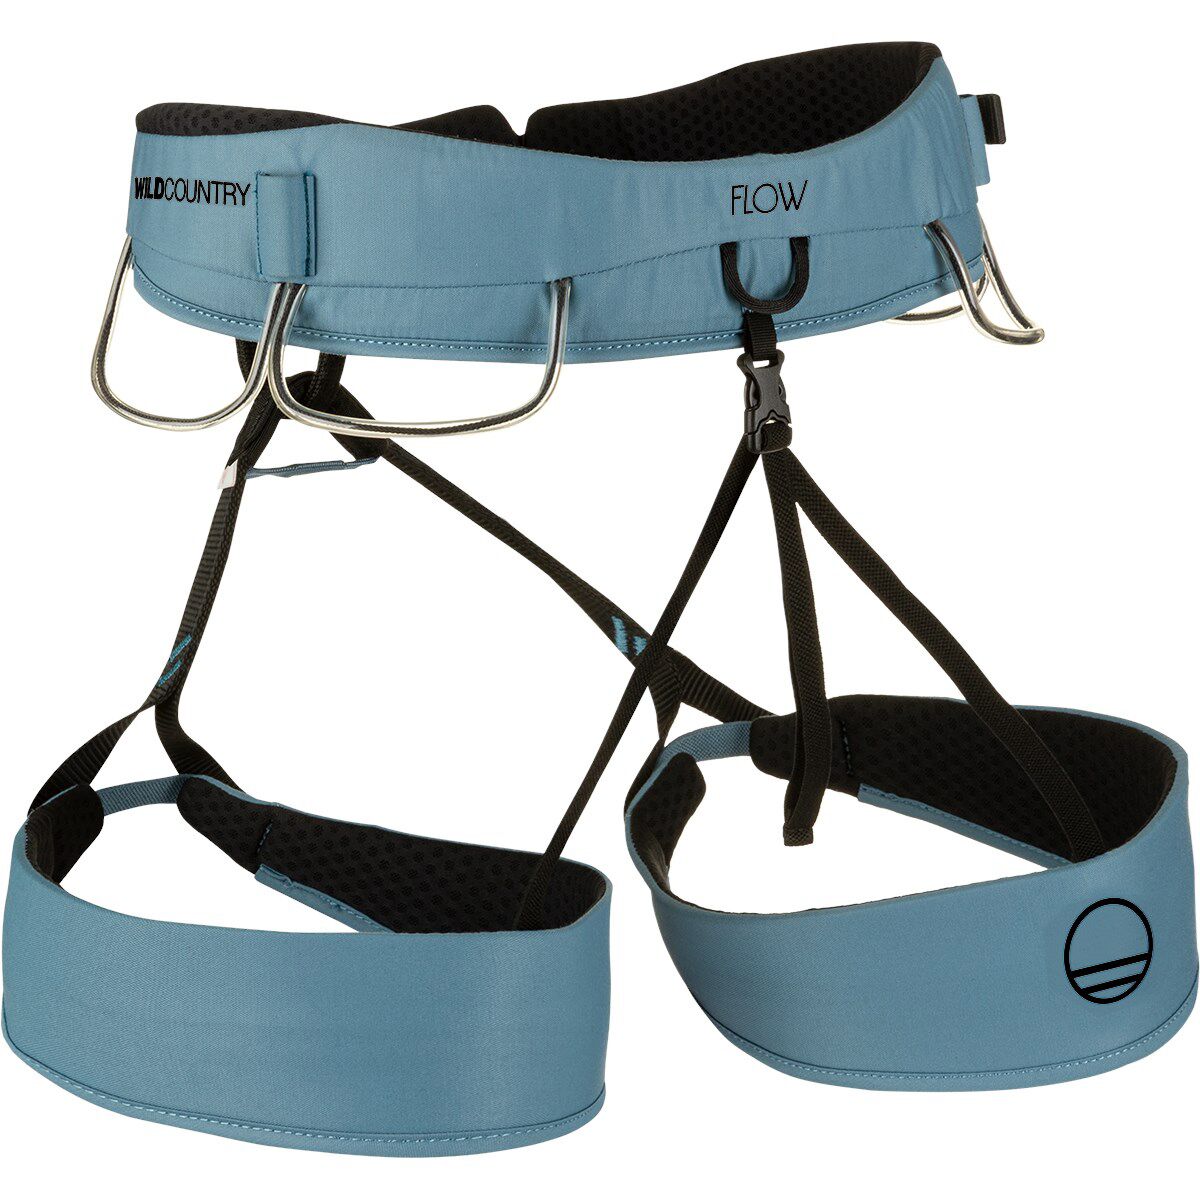 Wild Country Flow 2.0 Harness